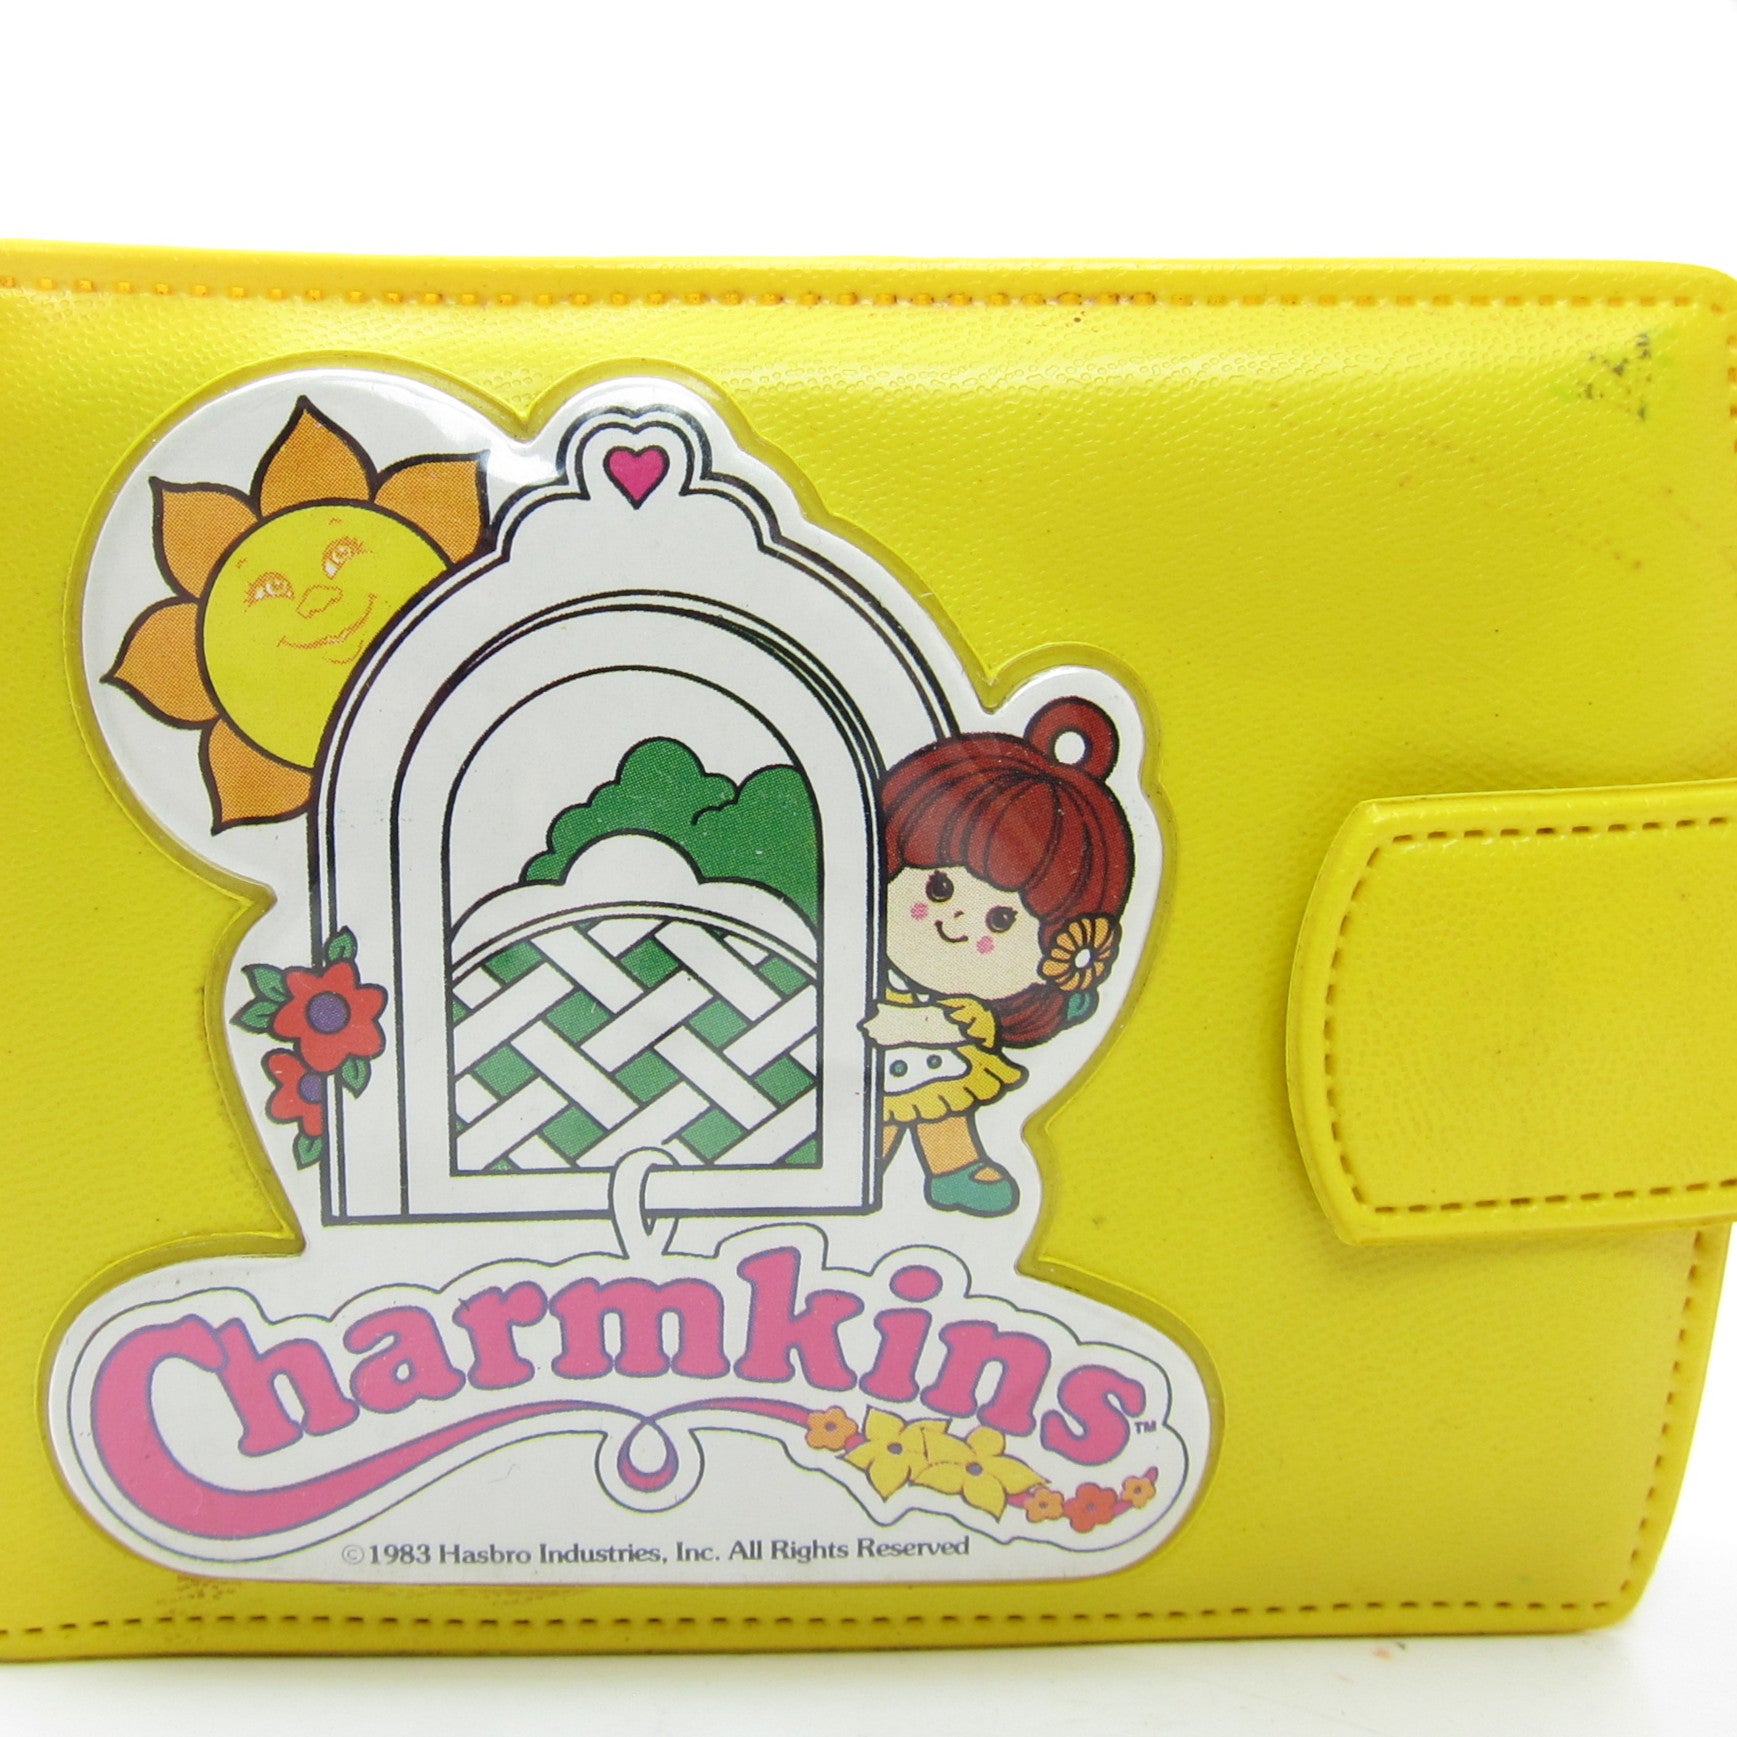 Charmkins Vintage Yellow Vinyl Kisslock Coin Purse with Brown Eyed Sus